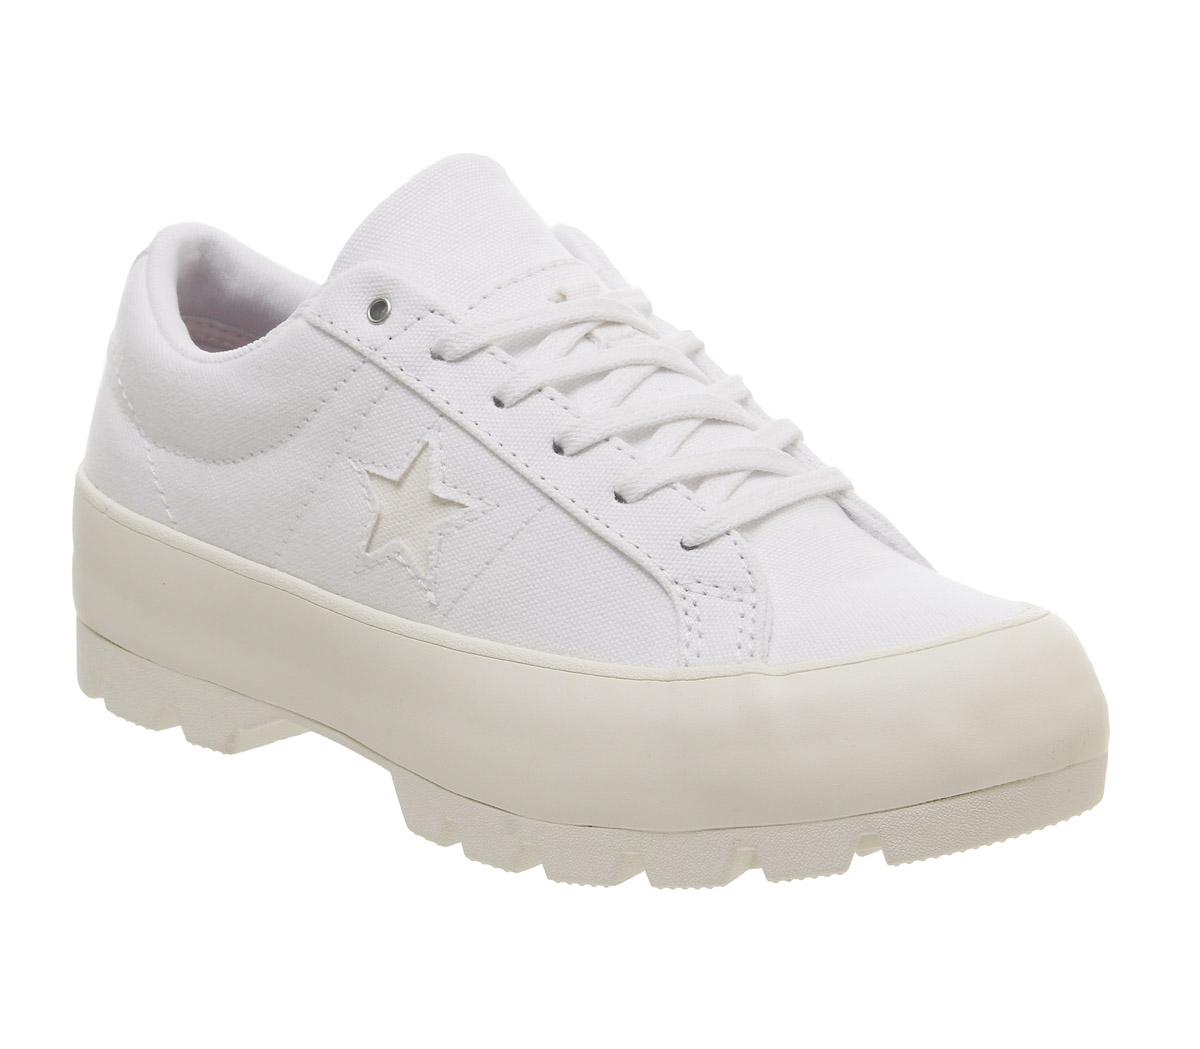 ConverseOne Star Lugged Ox TrainersWhite White Egret